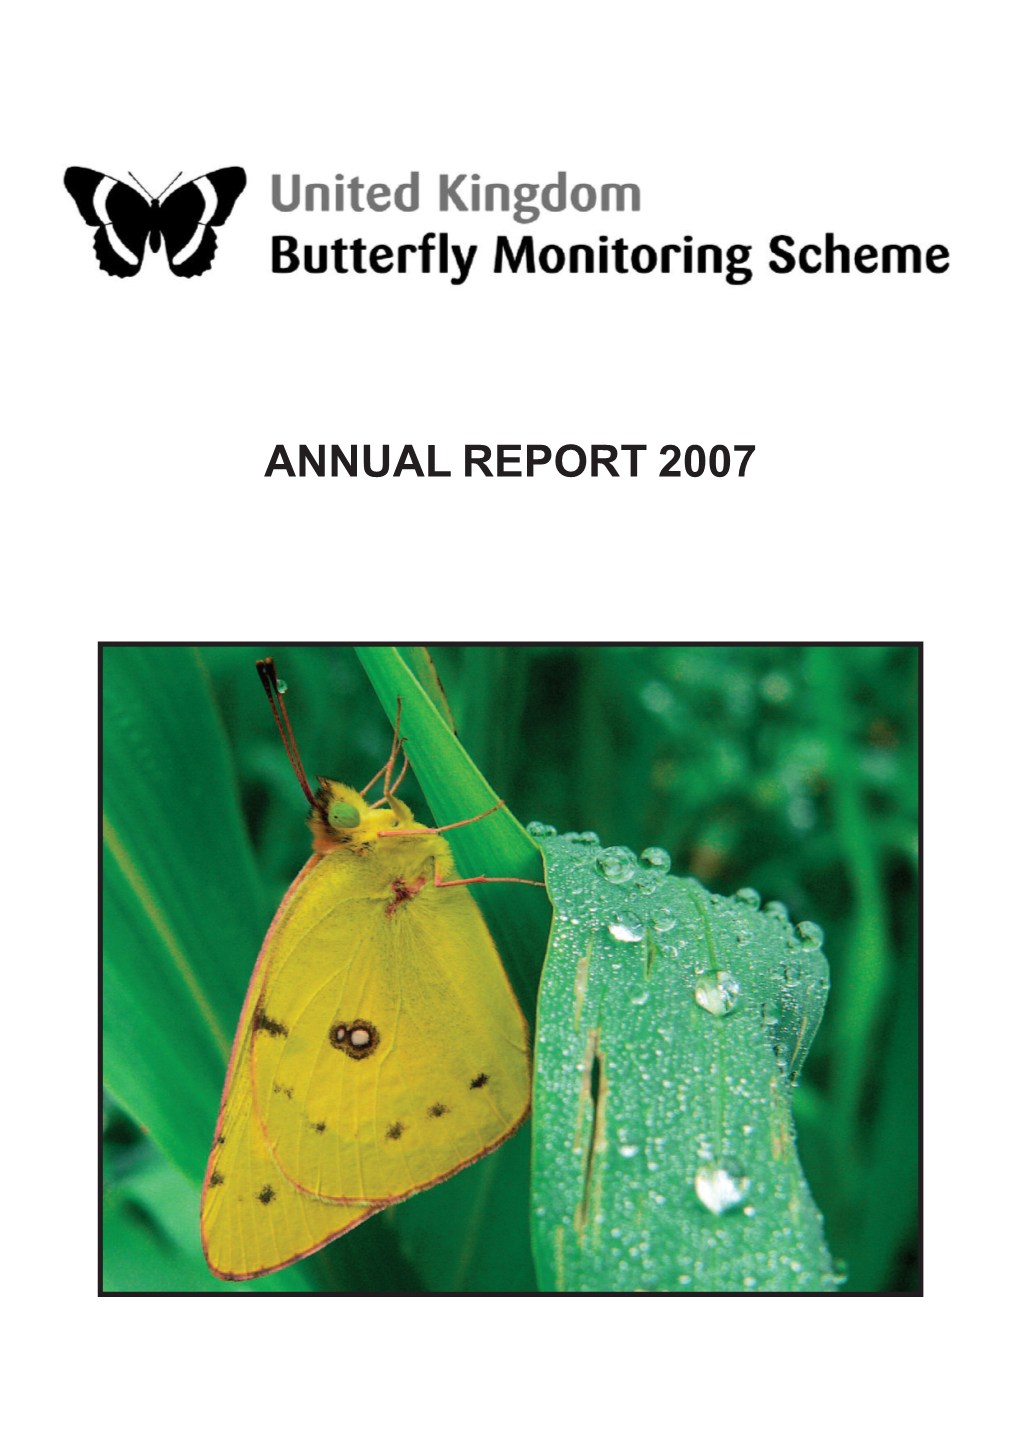 ANNUAL REPORT 2007 Tracking Changes in the Abundance of UK Butterflies